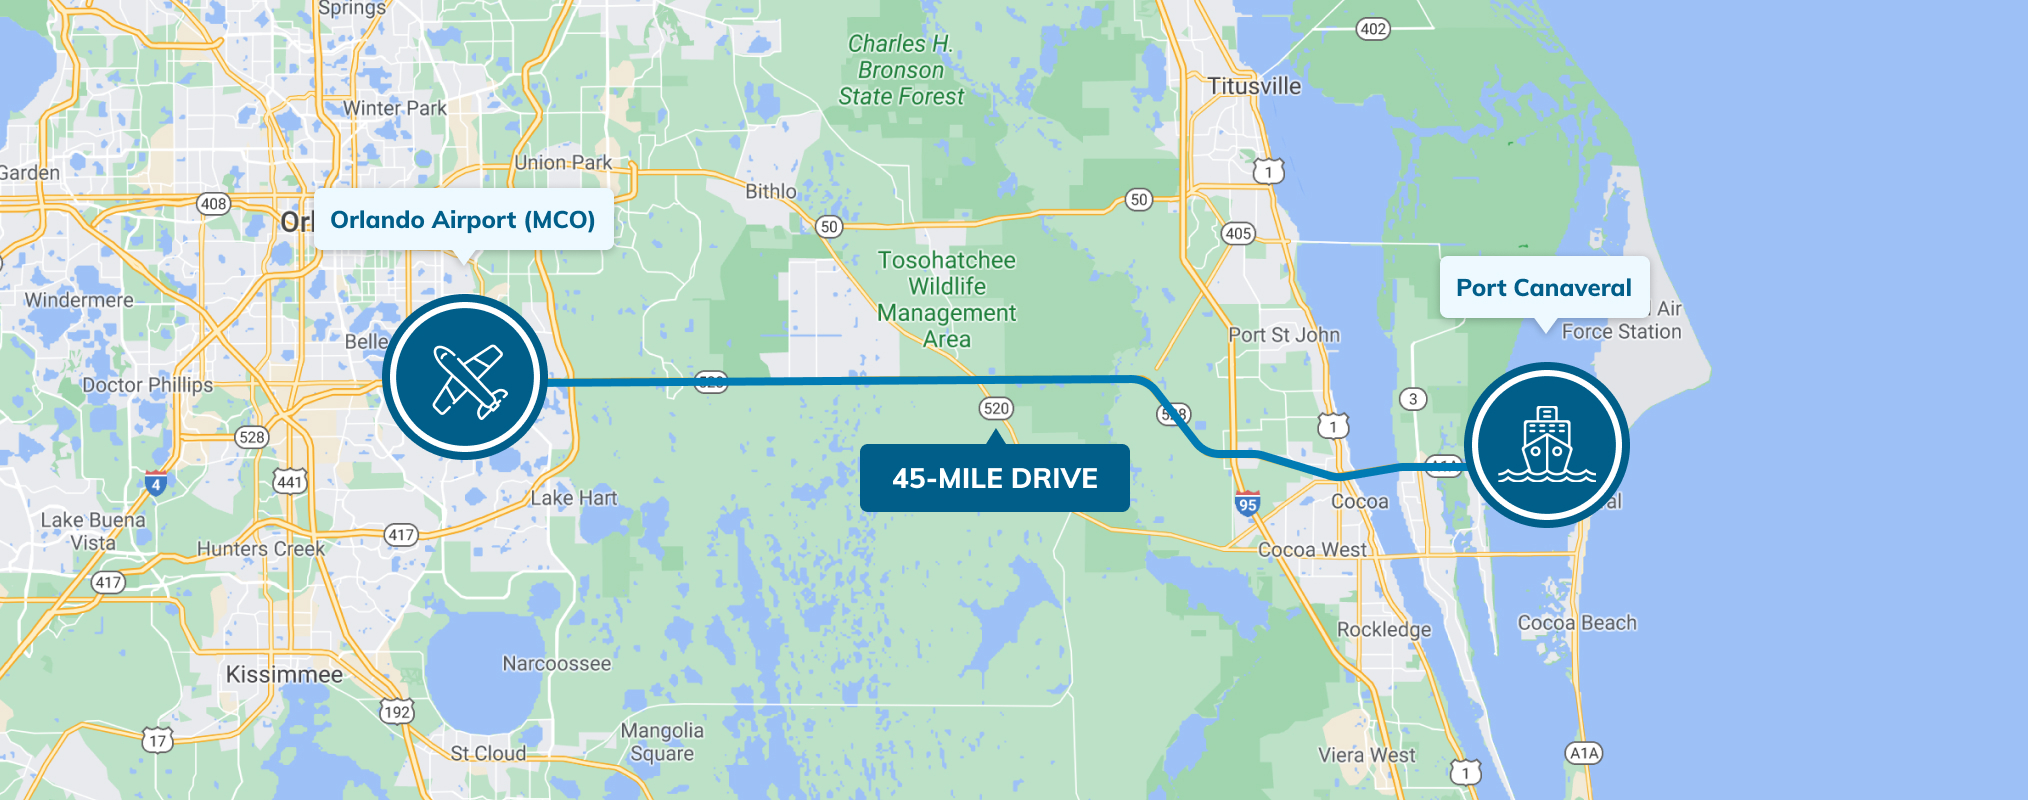 Best Way To Get From Orlando Airport To Port Canaveral